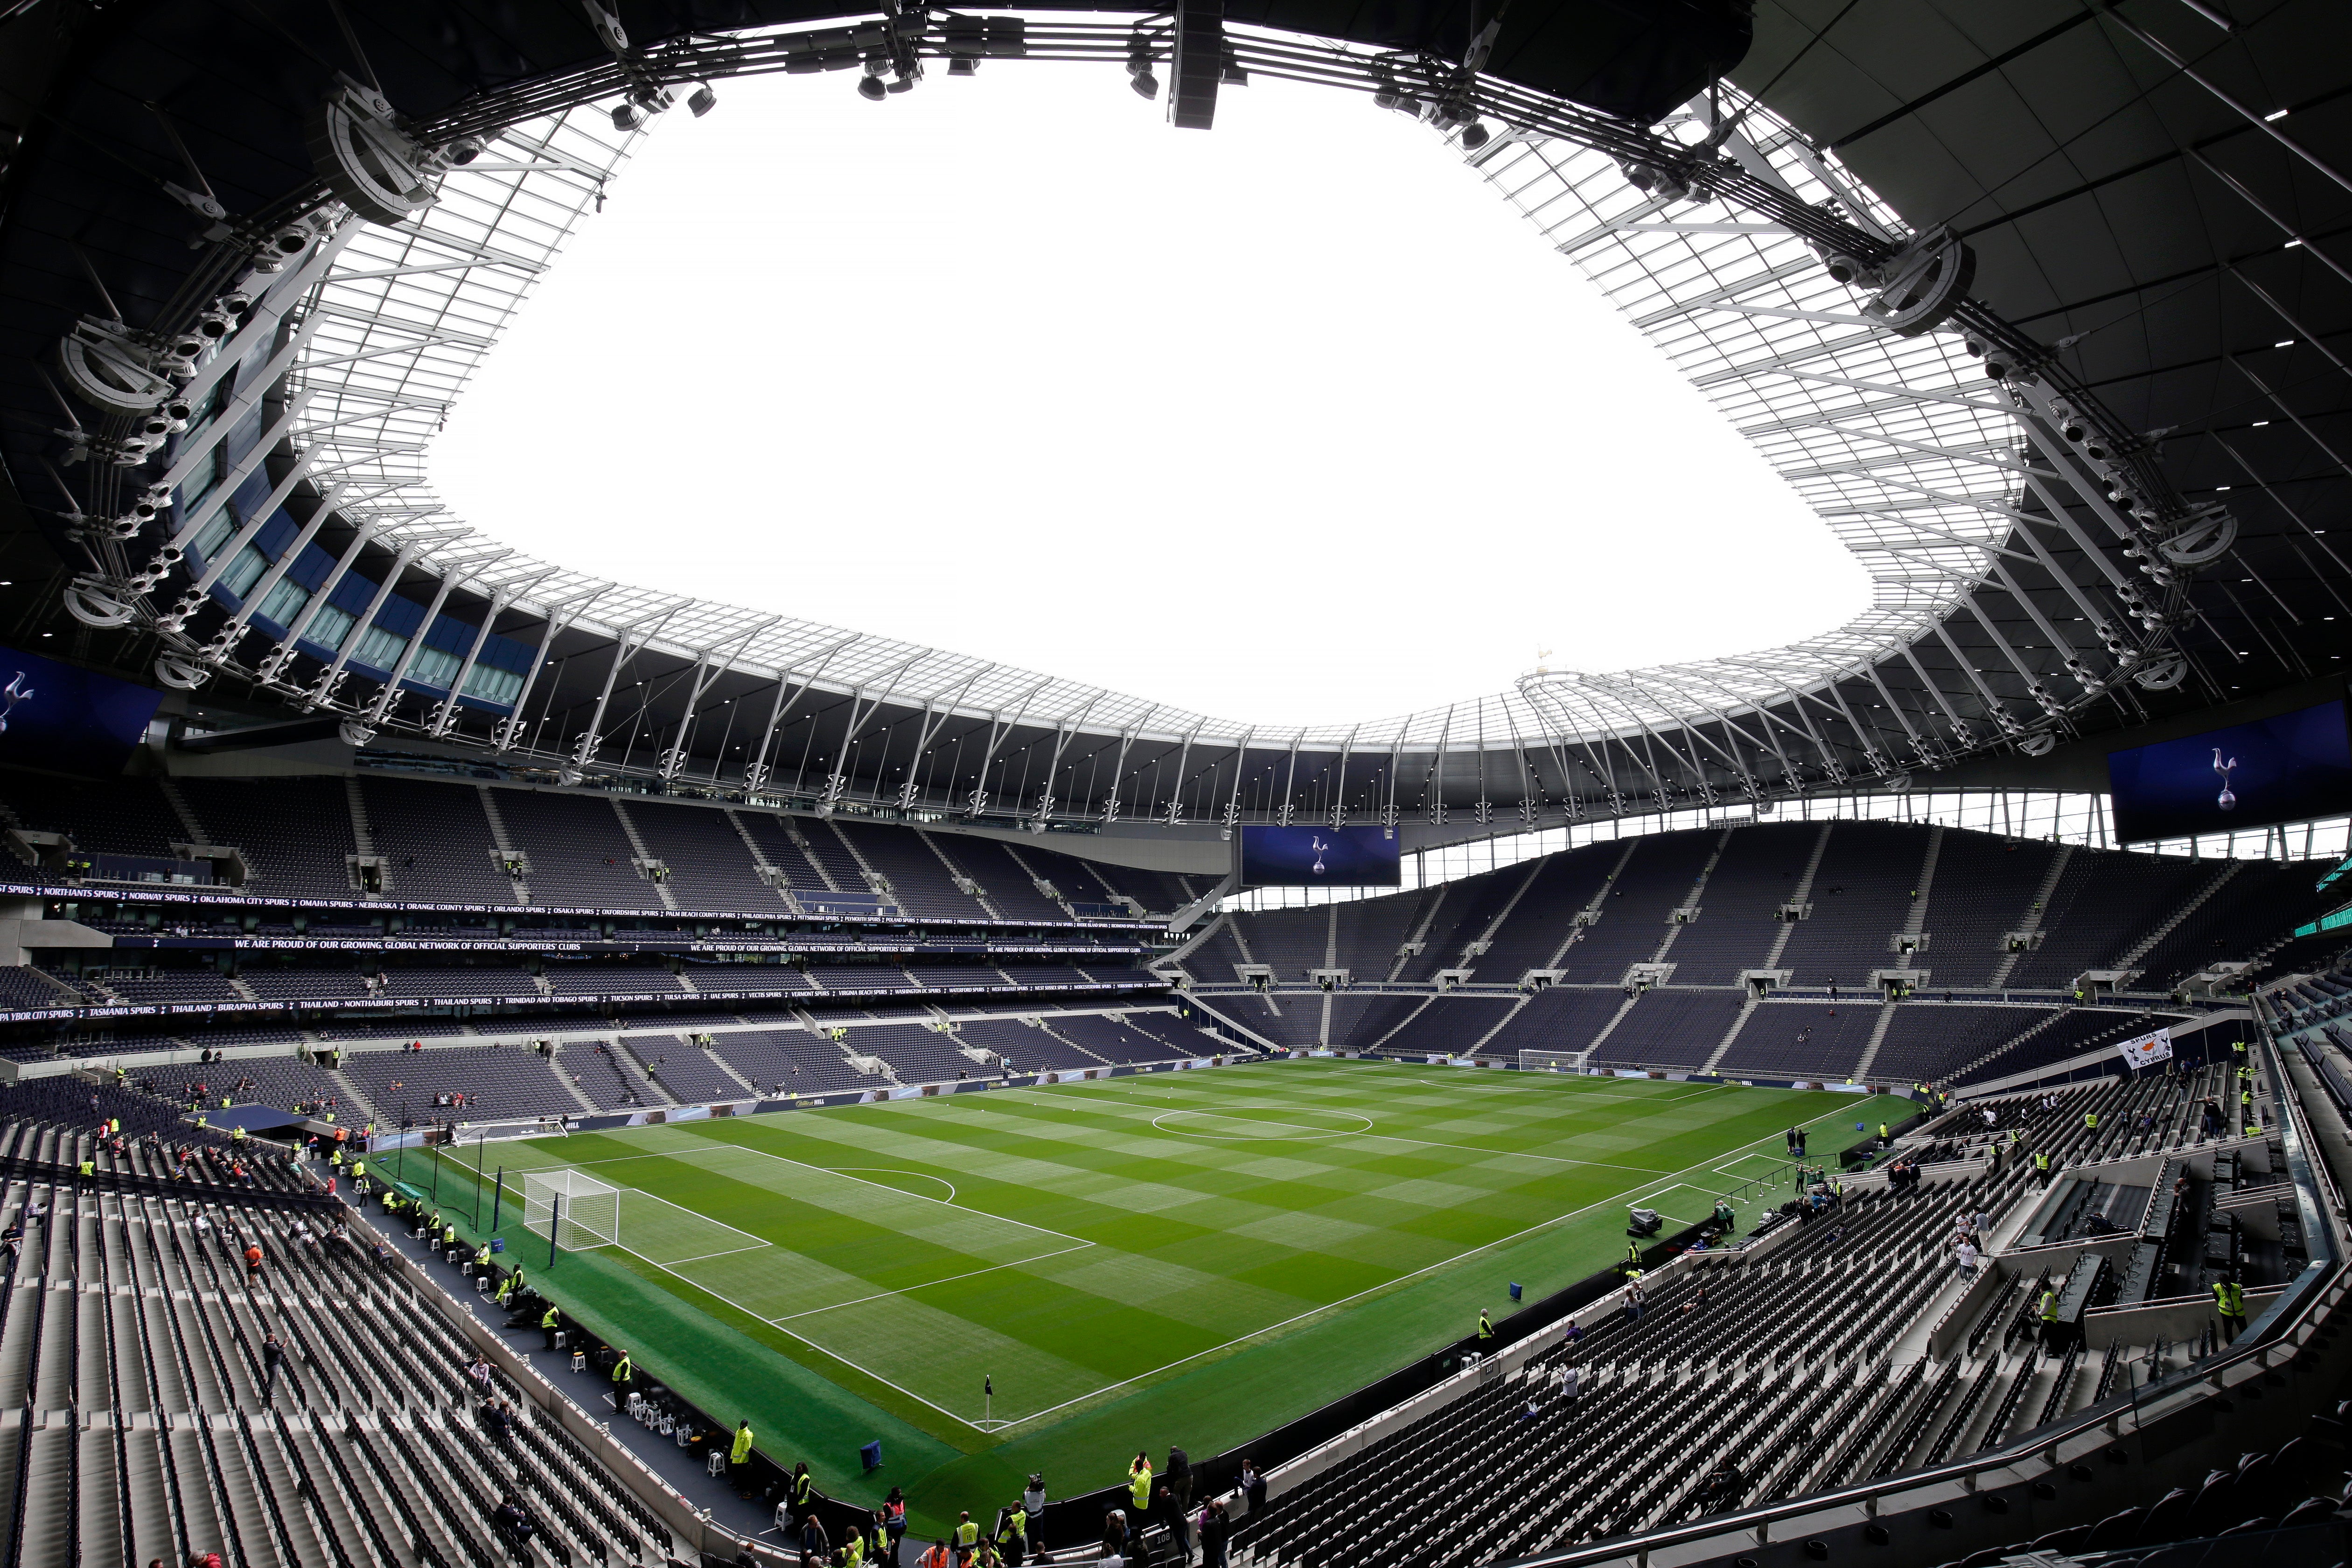 The Tottenham Hotspur Stadium could have been an option for Uefa